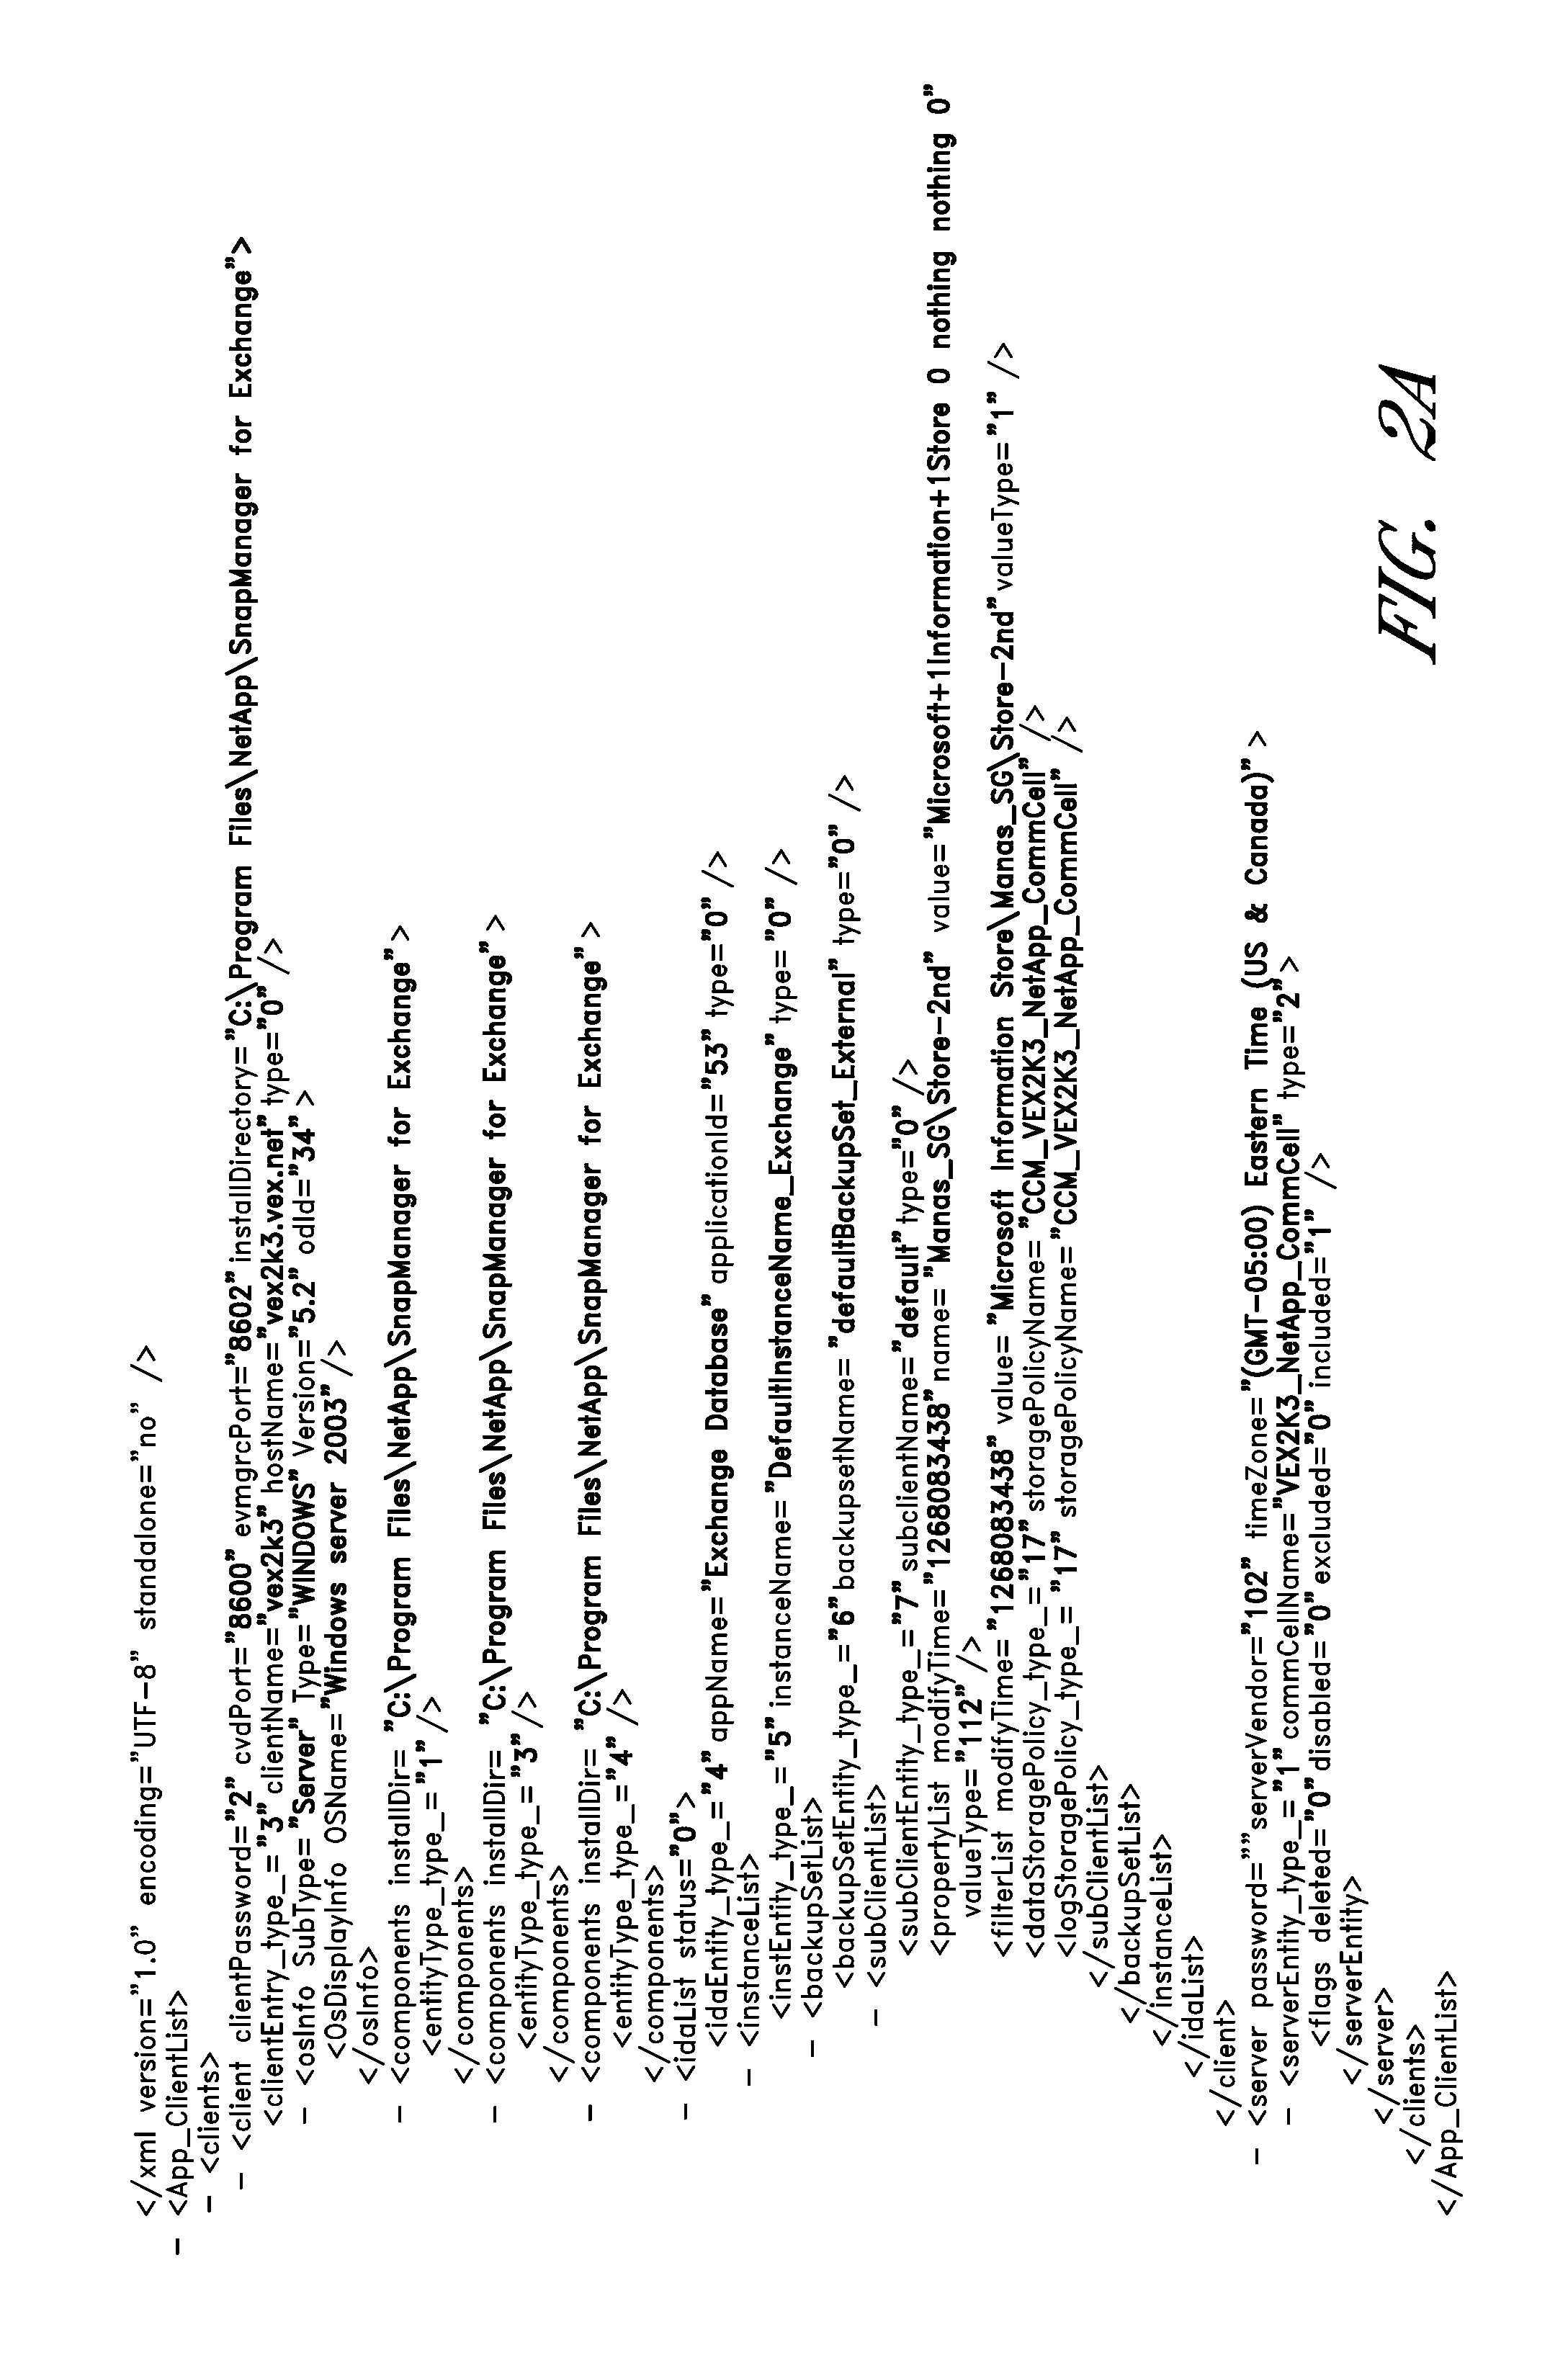 Data mining systems and methods for heterogeneous data sources